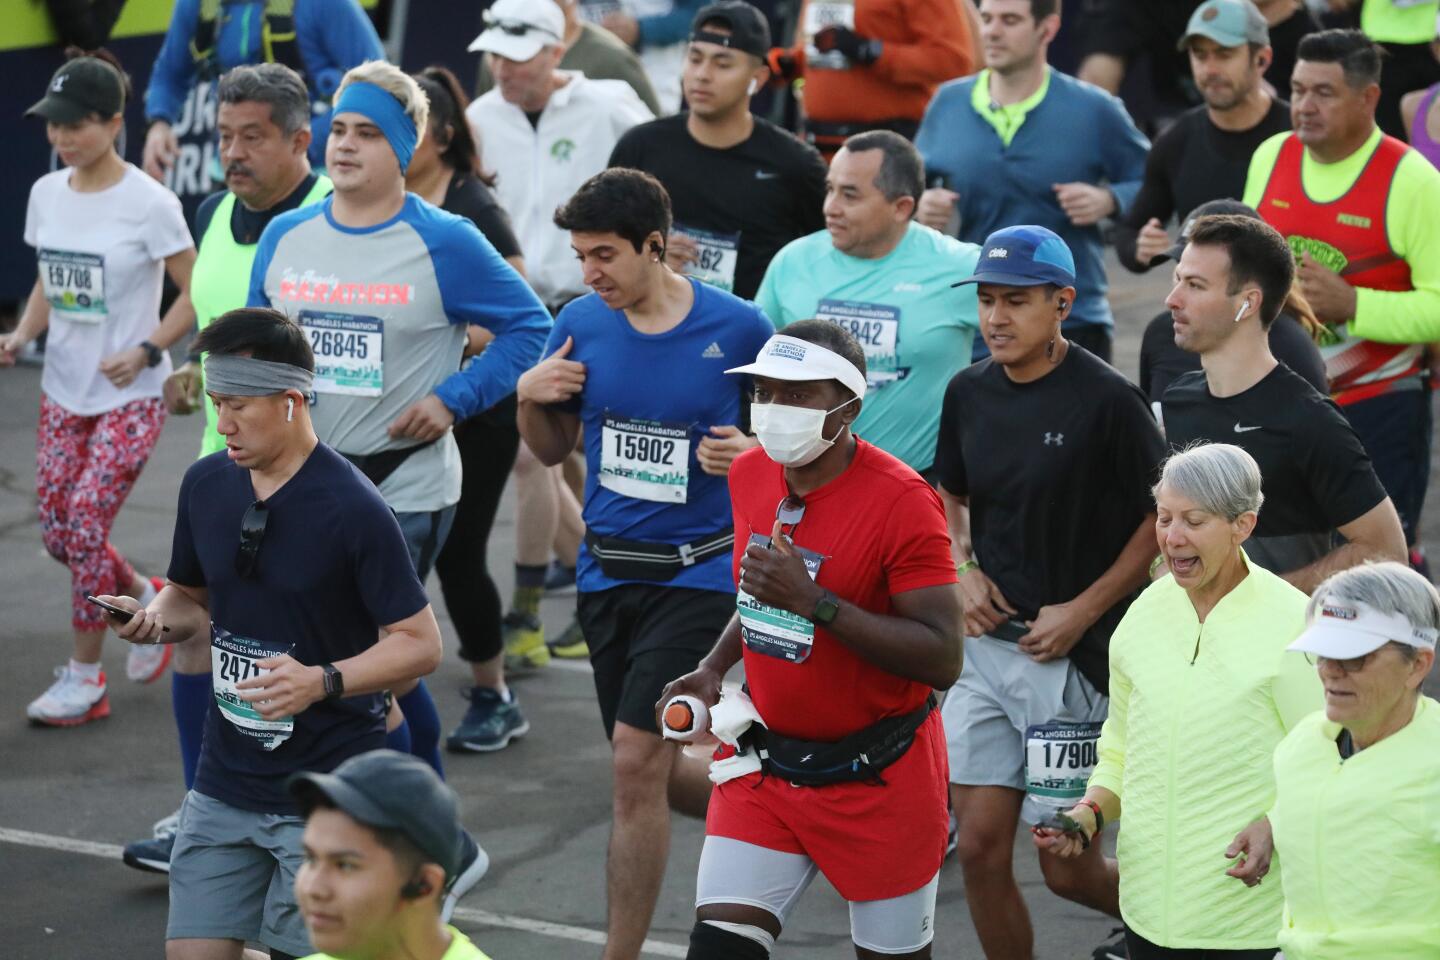 A handful of runners chose to wear protective masks while participating in the 2020 L.A. Marathon.